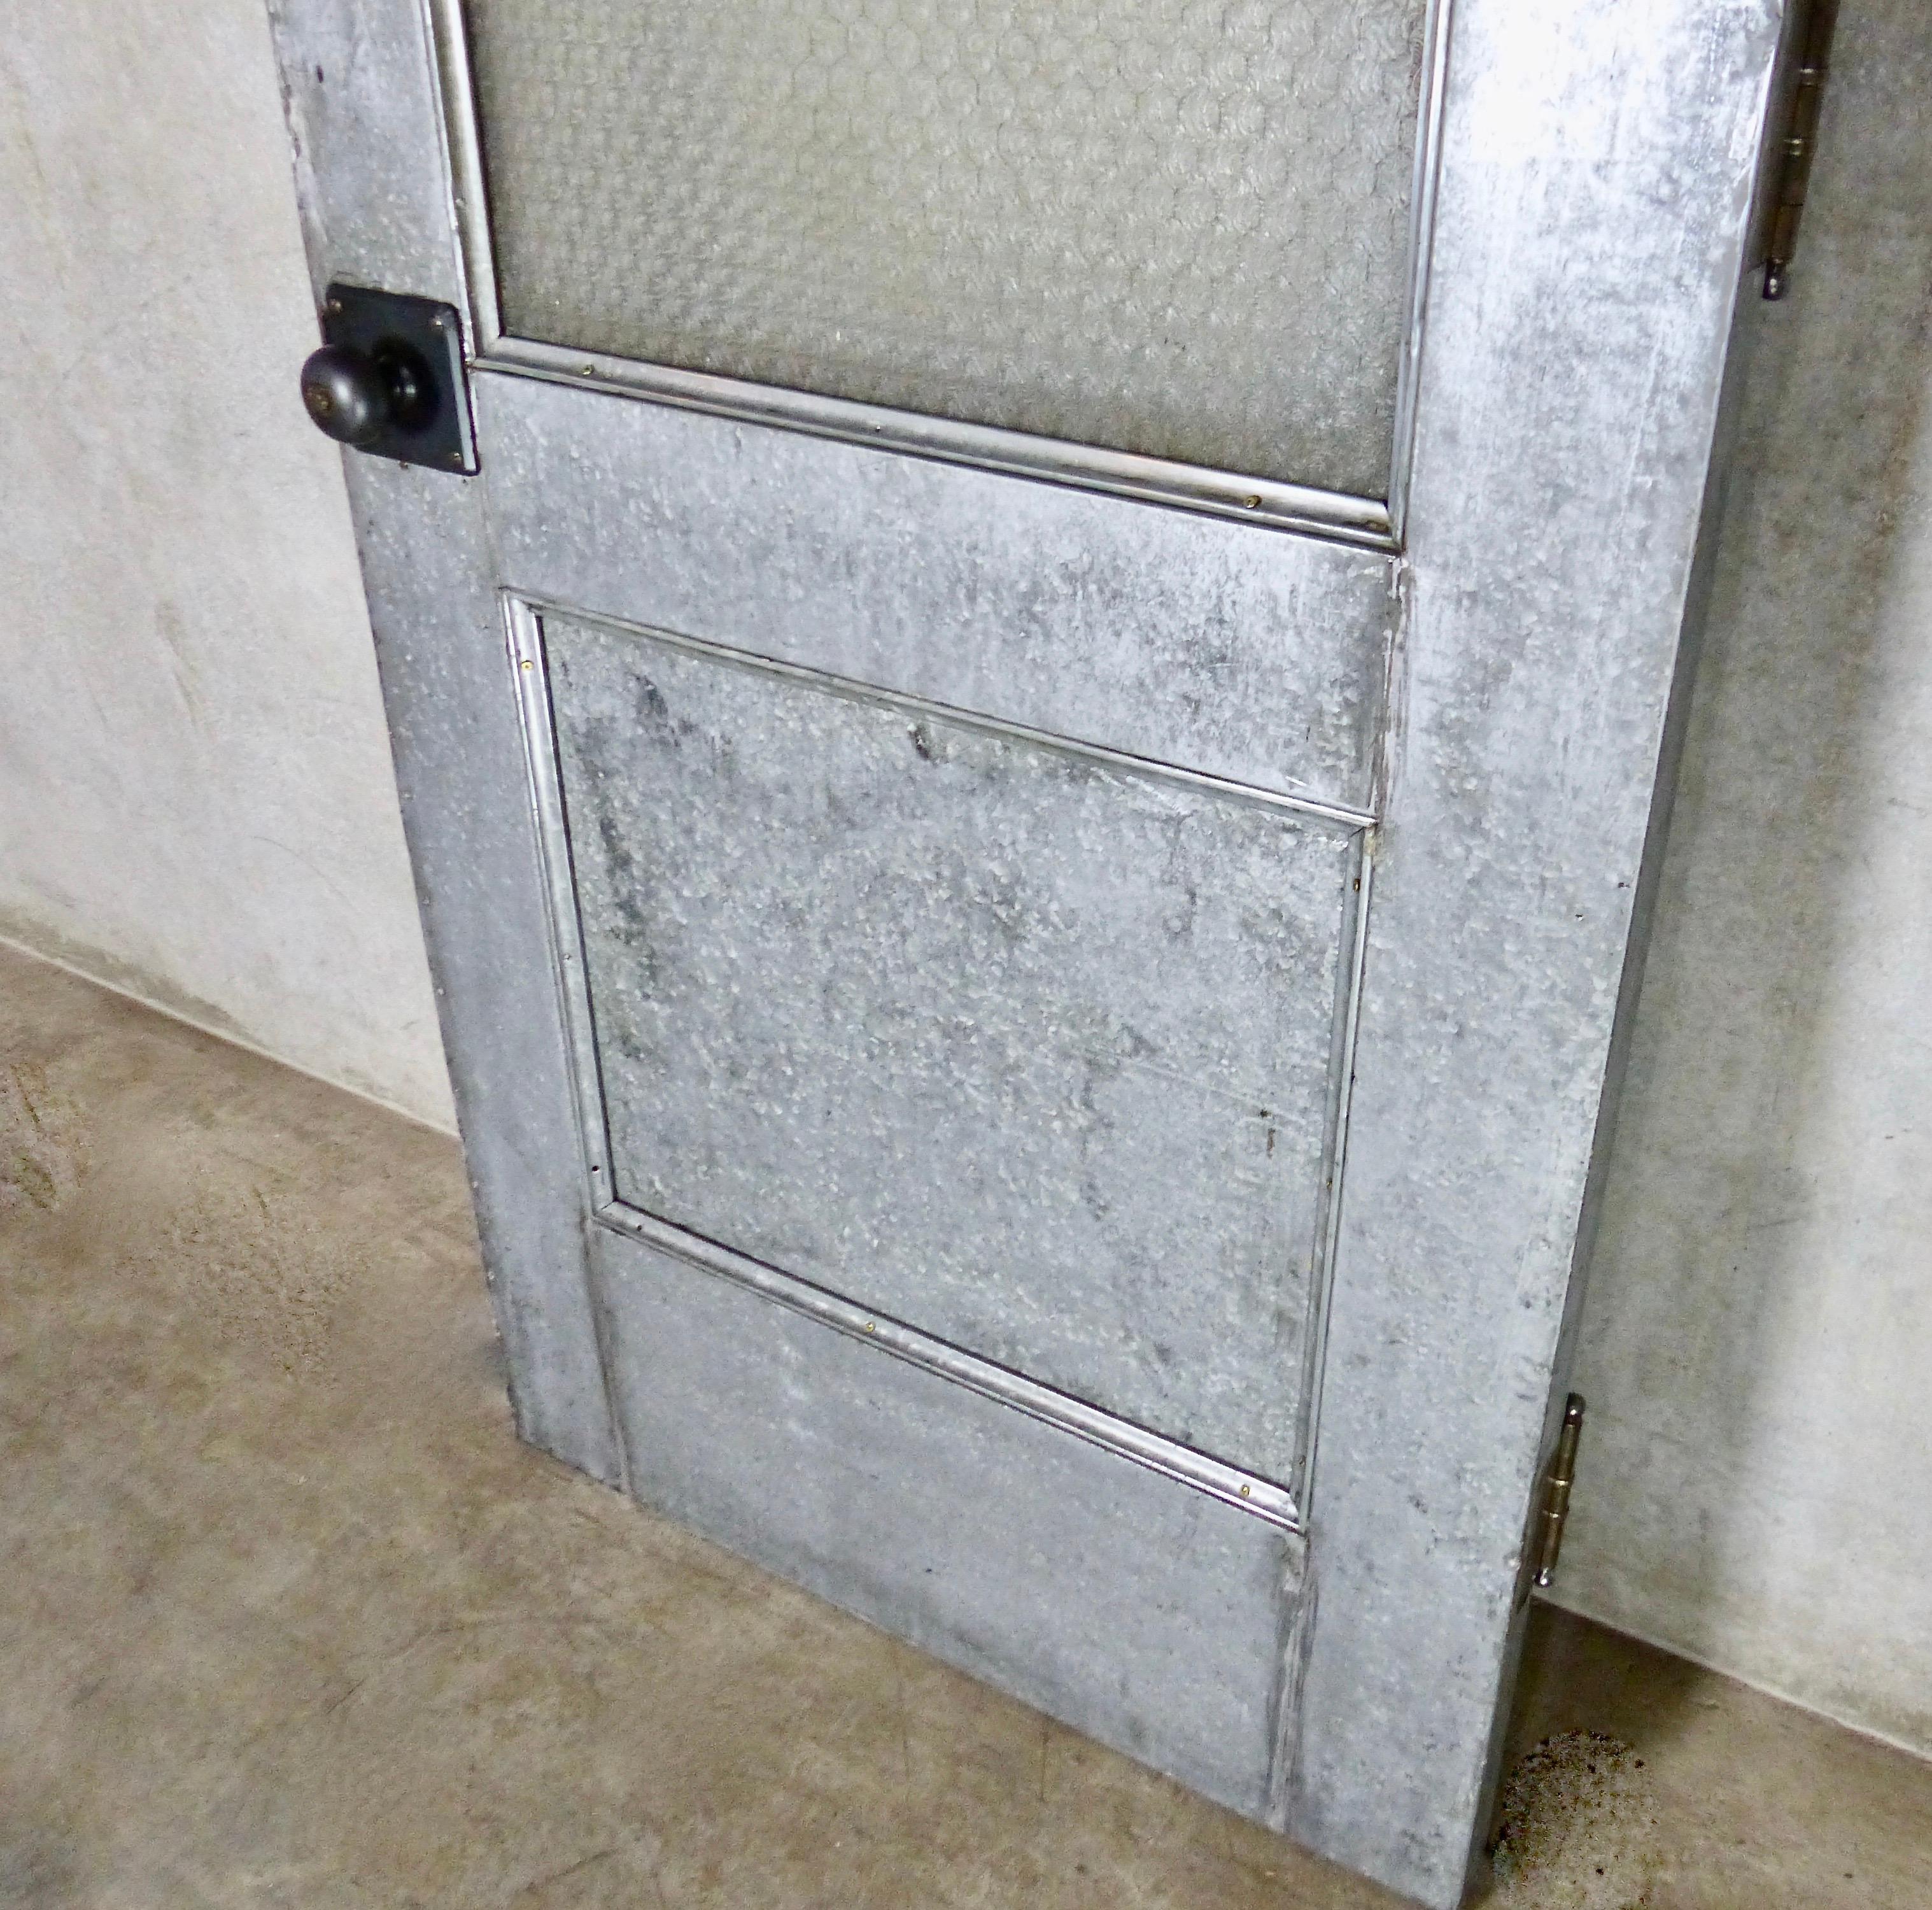 A handsome galvanized steel door from circa 1910 — with its original and unusual etched chickenwire glass intact. Nice old nickel hinges and handles as well. A high visibility, high impact interior or exterior door.
Note: we have the original jam